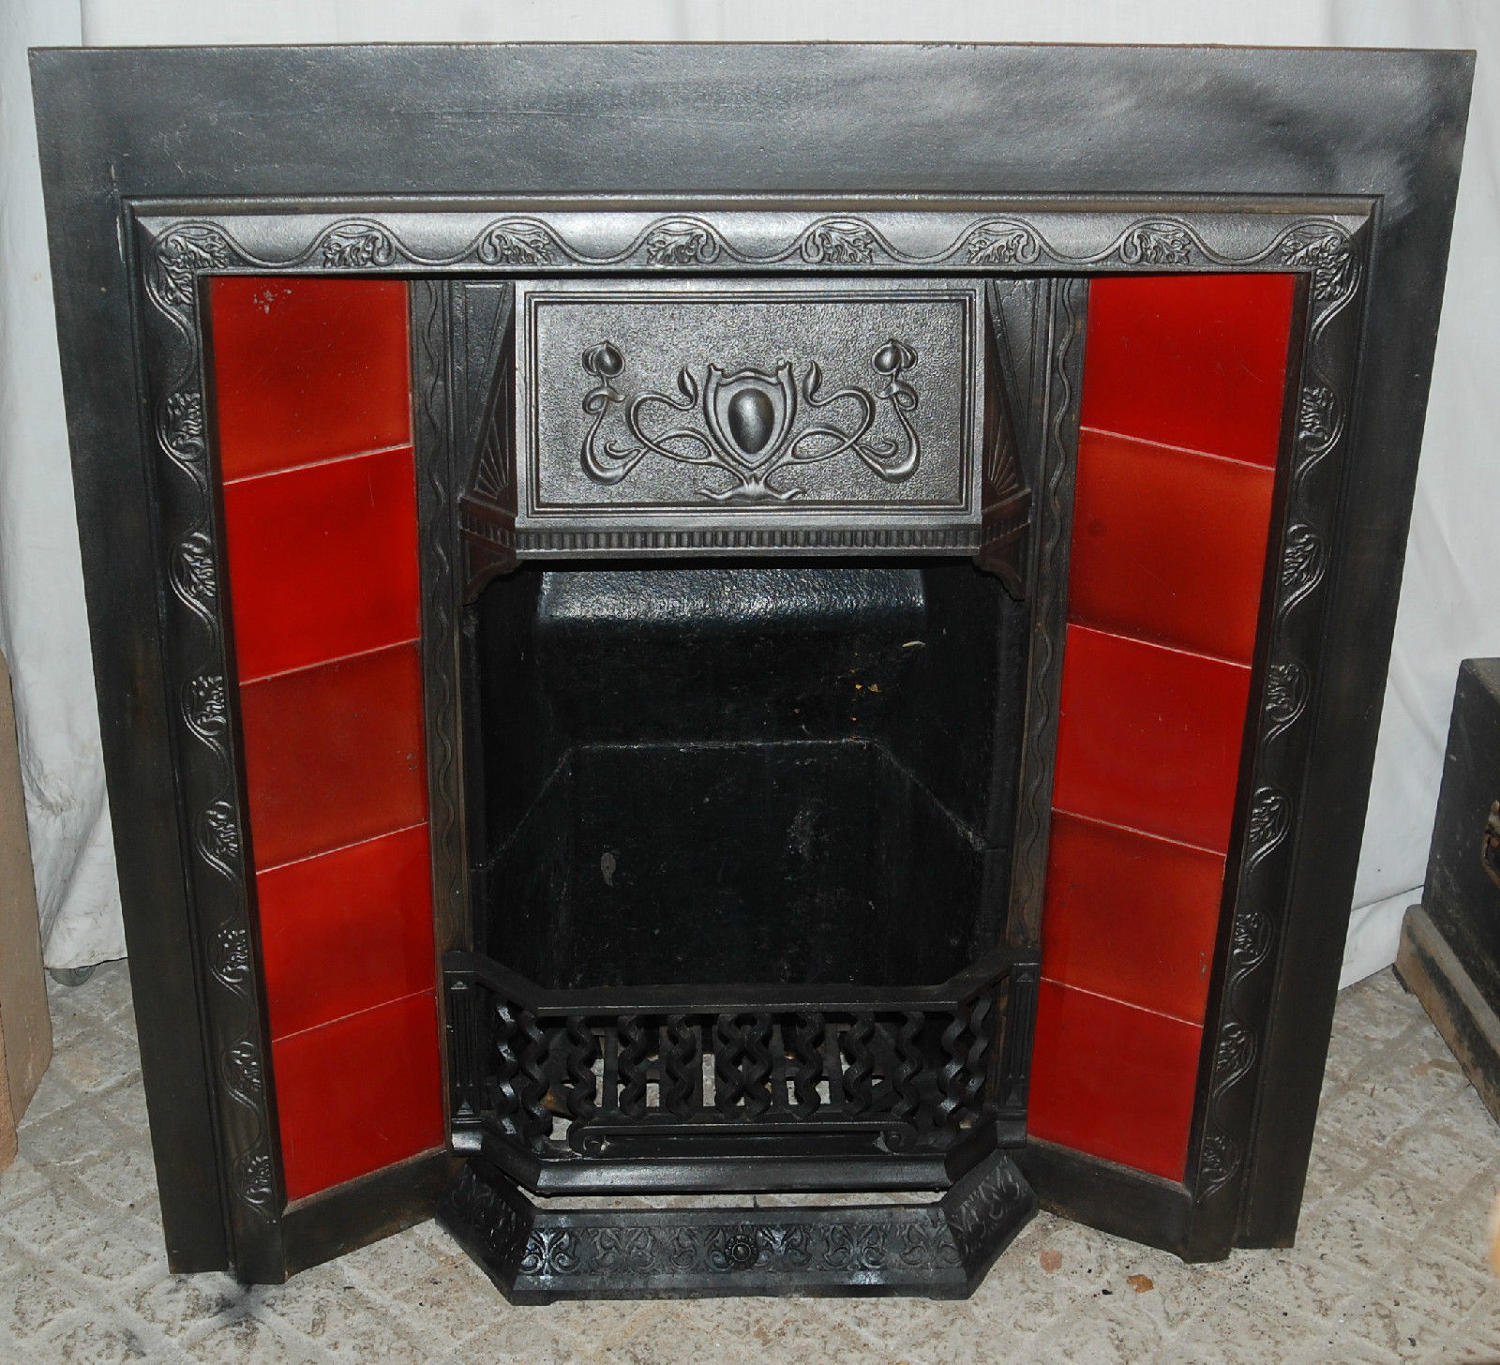 FI0008 A Very Pretty Cast Iron Art Nouveau Fire Insert with Red Tiles